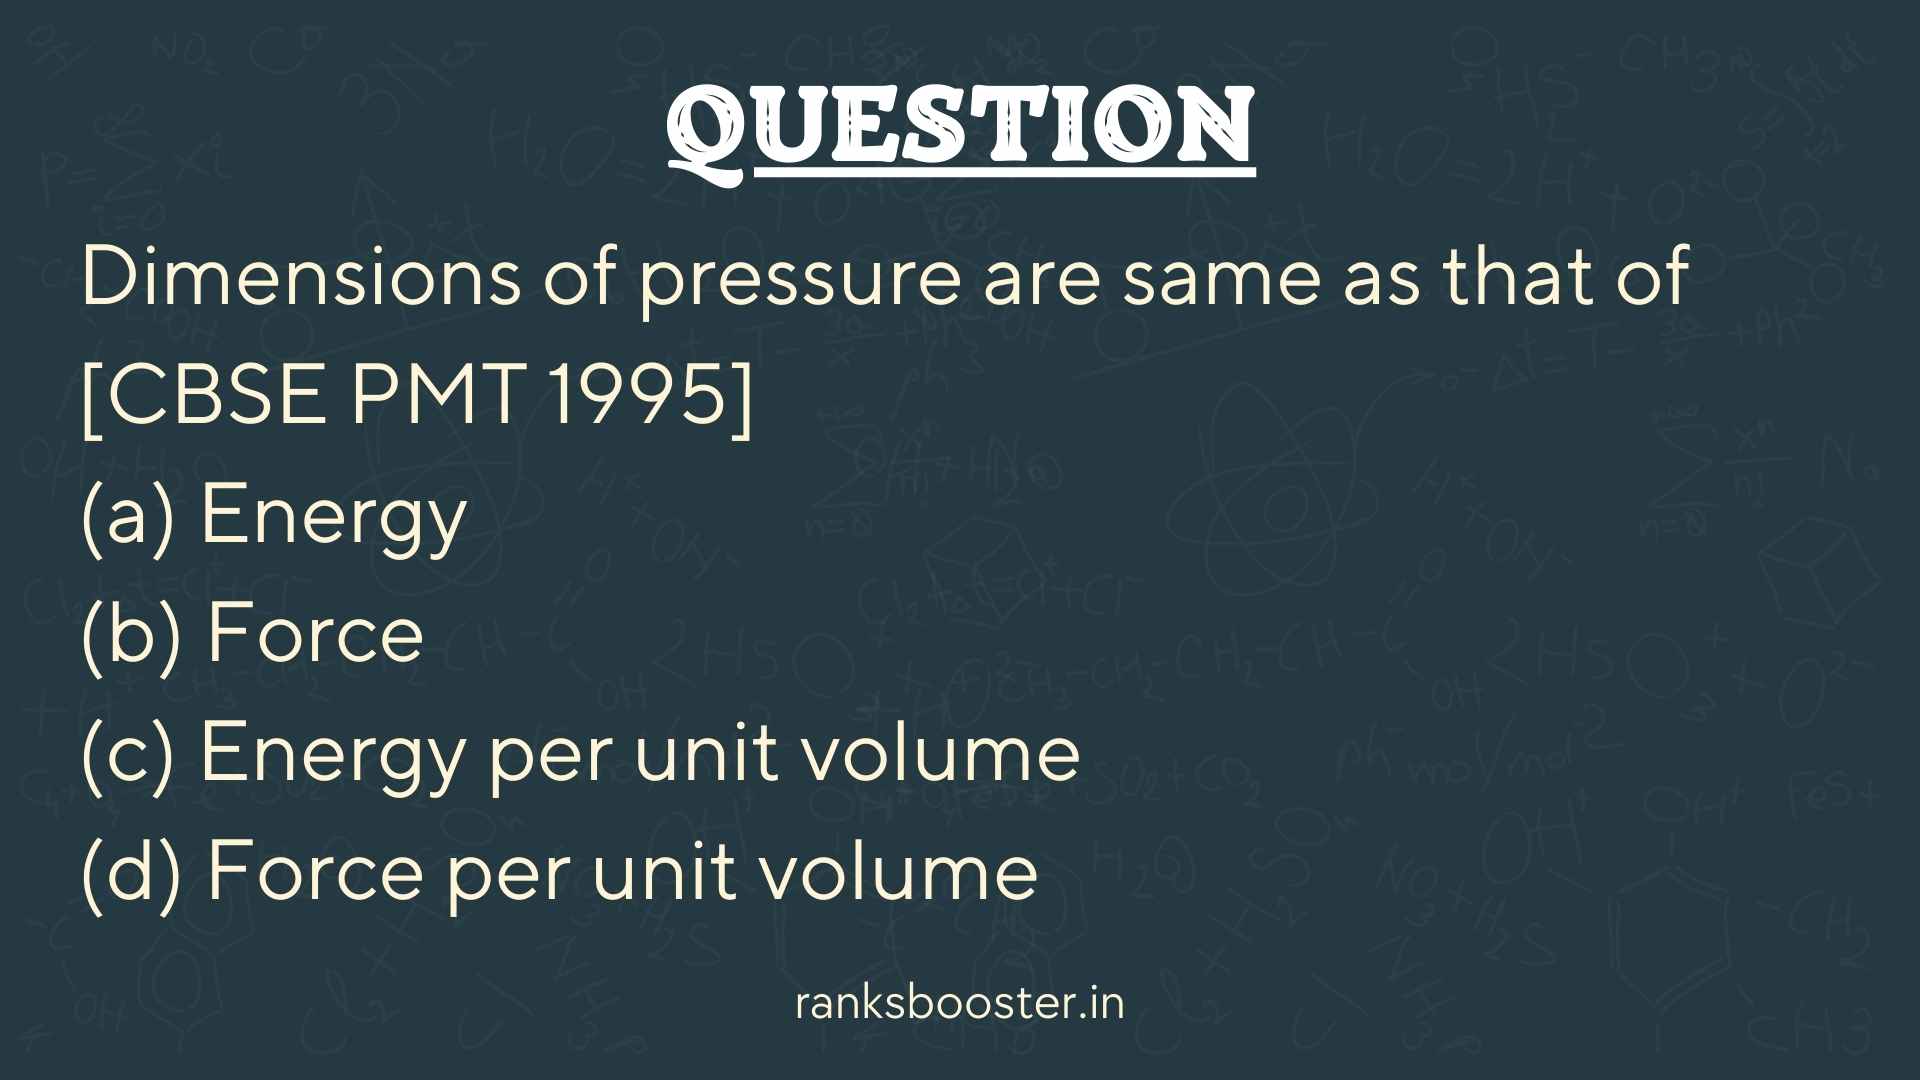 Question: Dimensions of pressure are same as that of [CBSE PMT 1995] (a) Energy (b) Force (c) Energy per unit volume (d) Force per unit volume